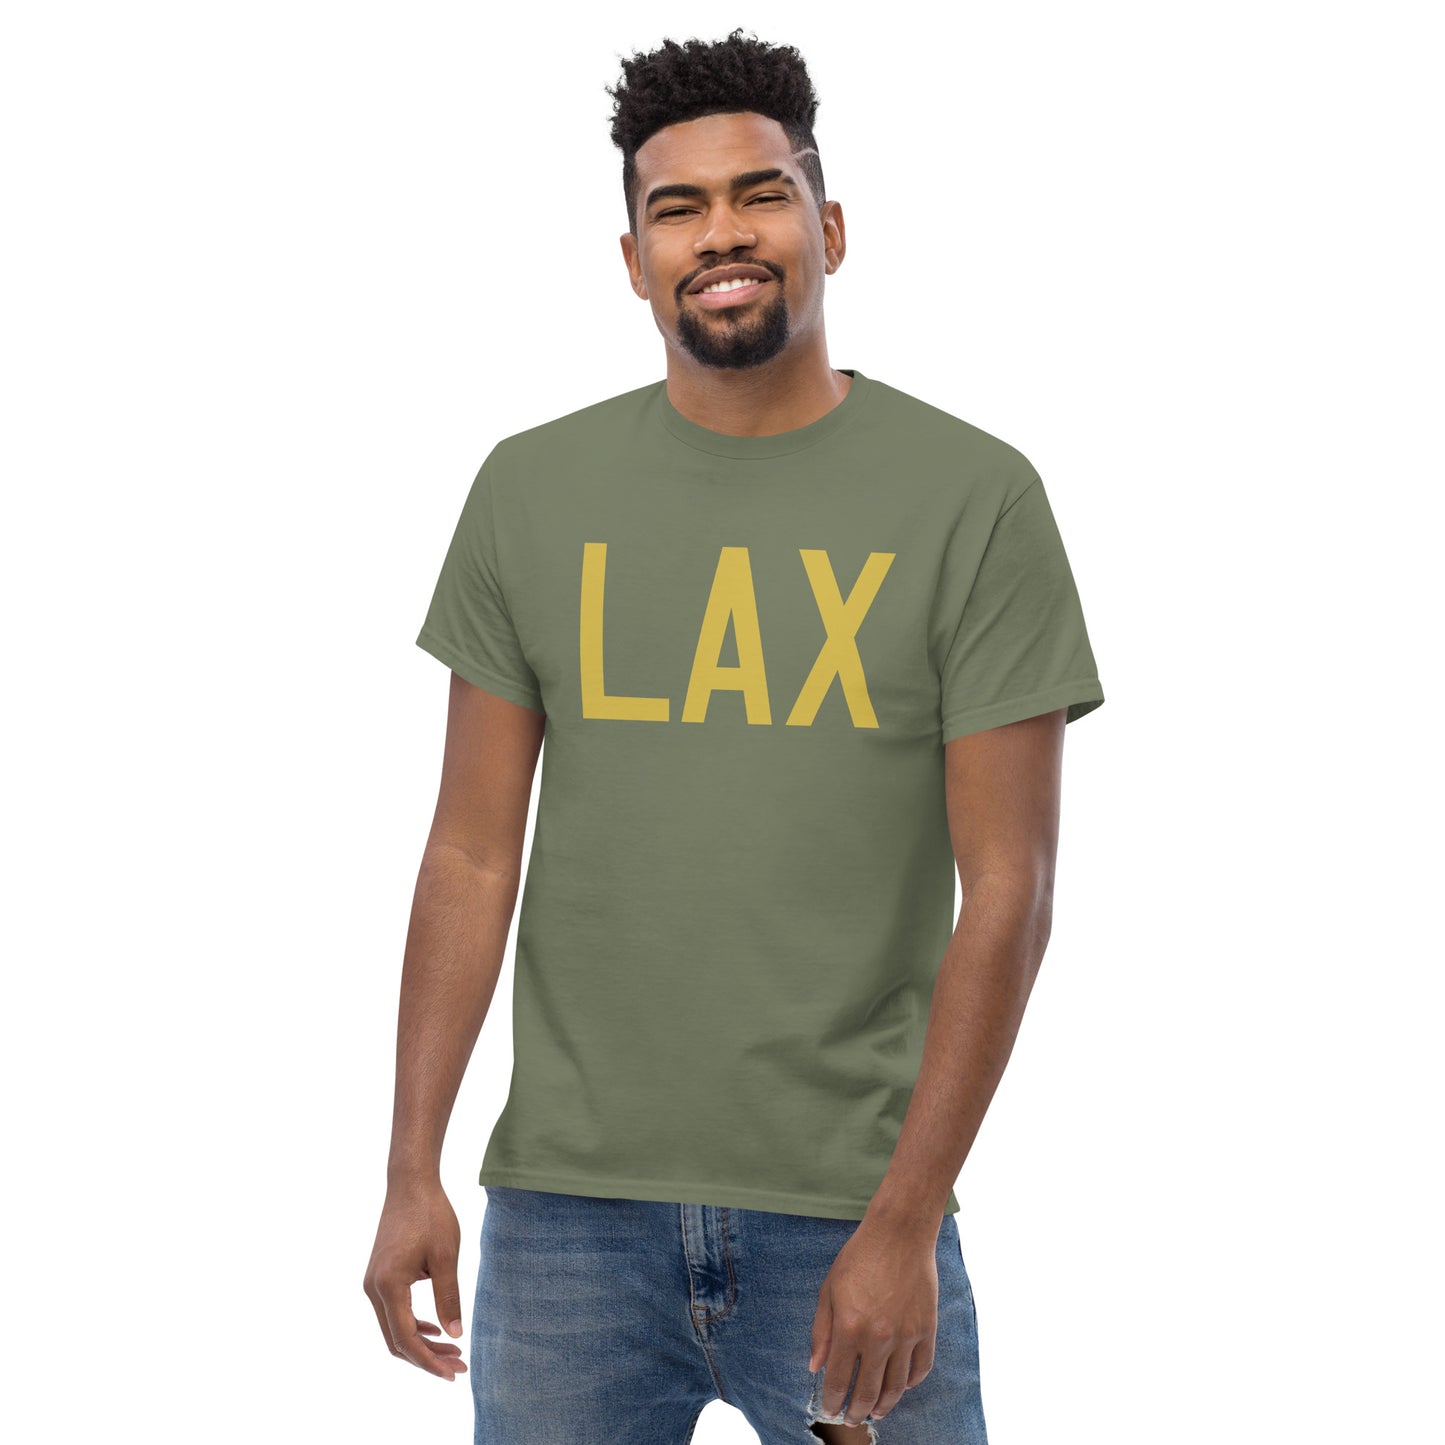 Aviation Enthusiast Men's Tee - Old Gold Graphic • LAX Los Angeles • YHM Designs - Image 06